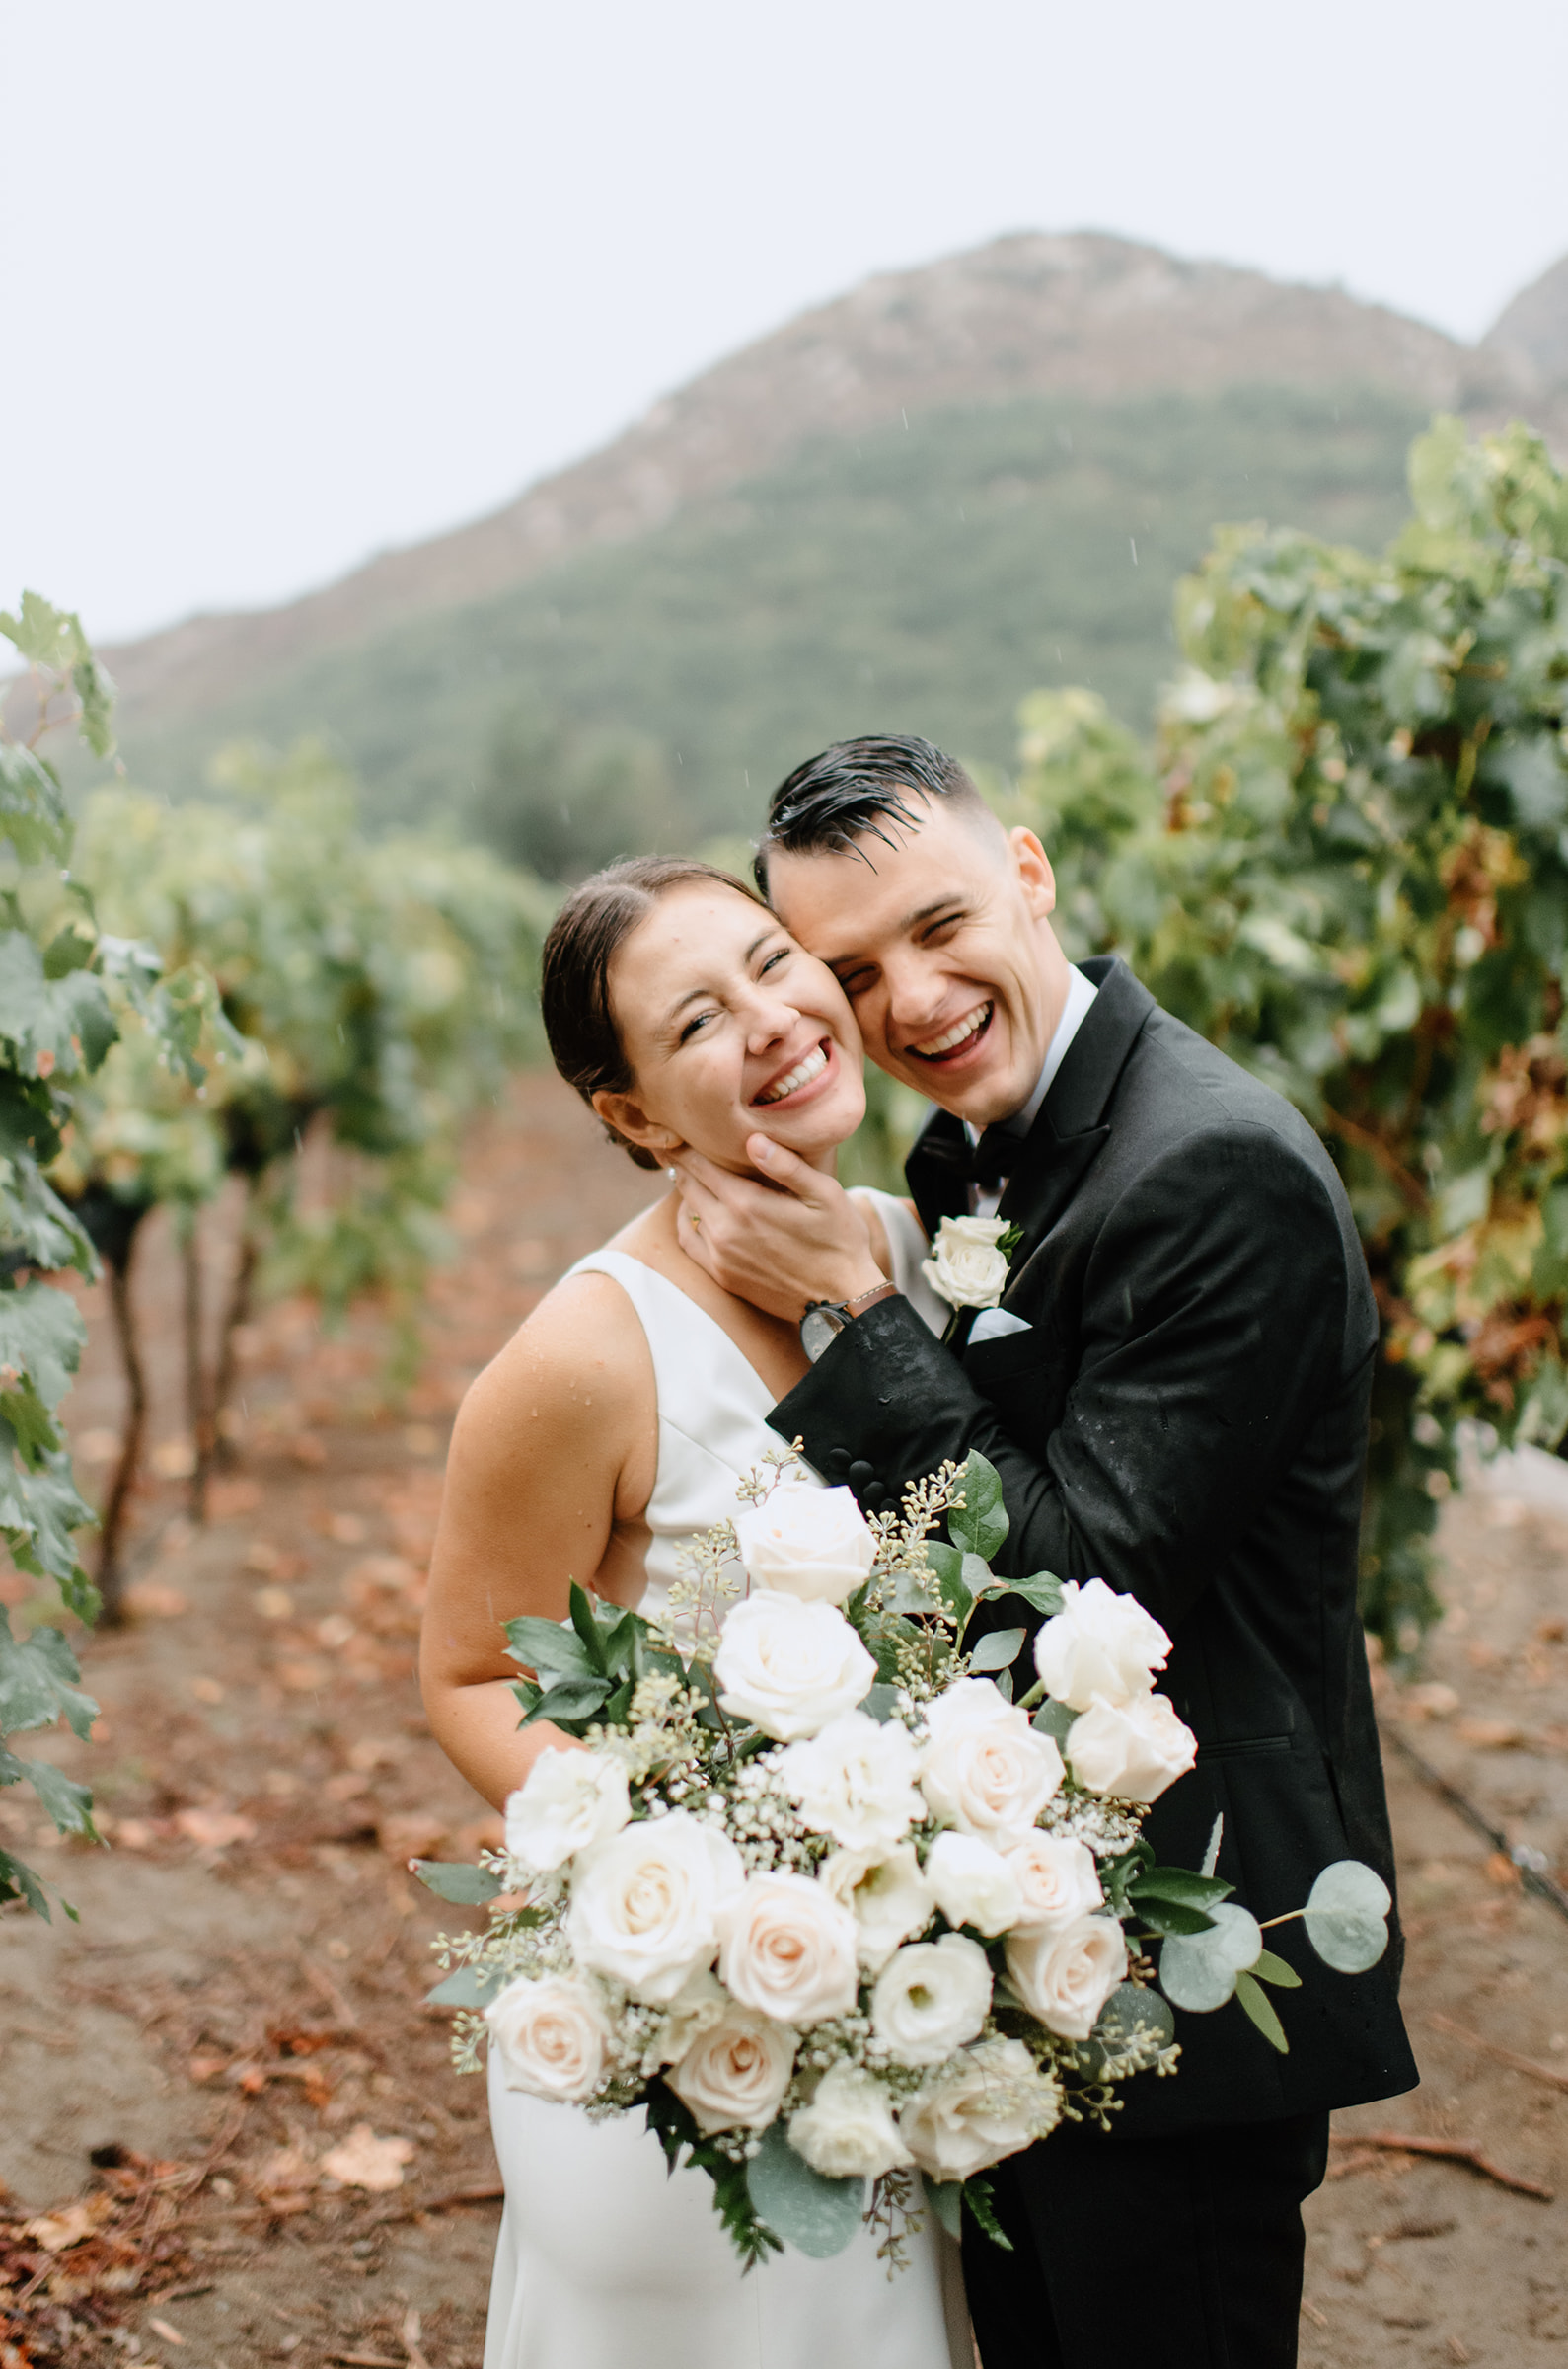 Bride and groom smile together after their rainy wedding ceremony at Rancho Guejito venue